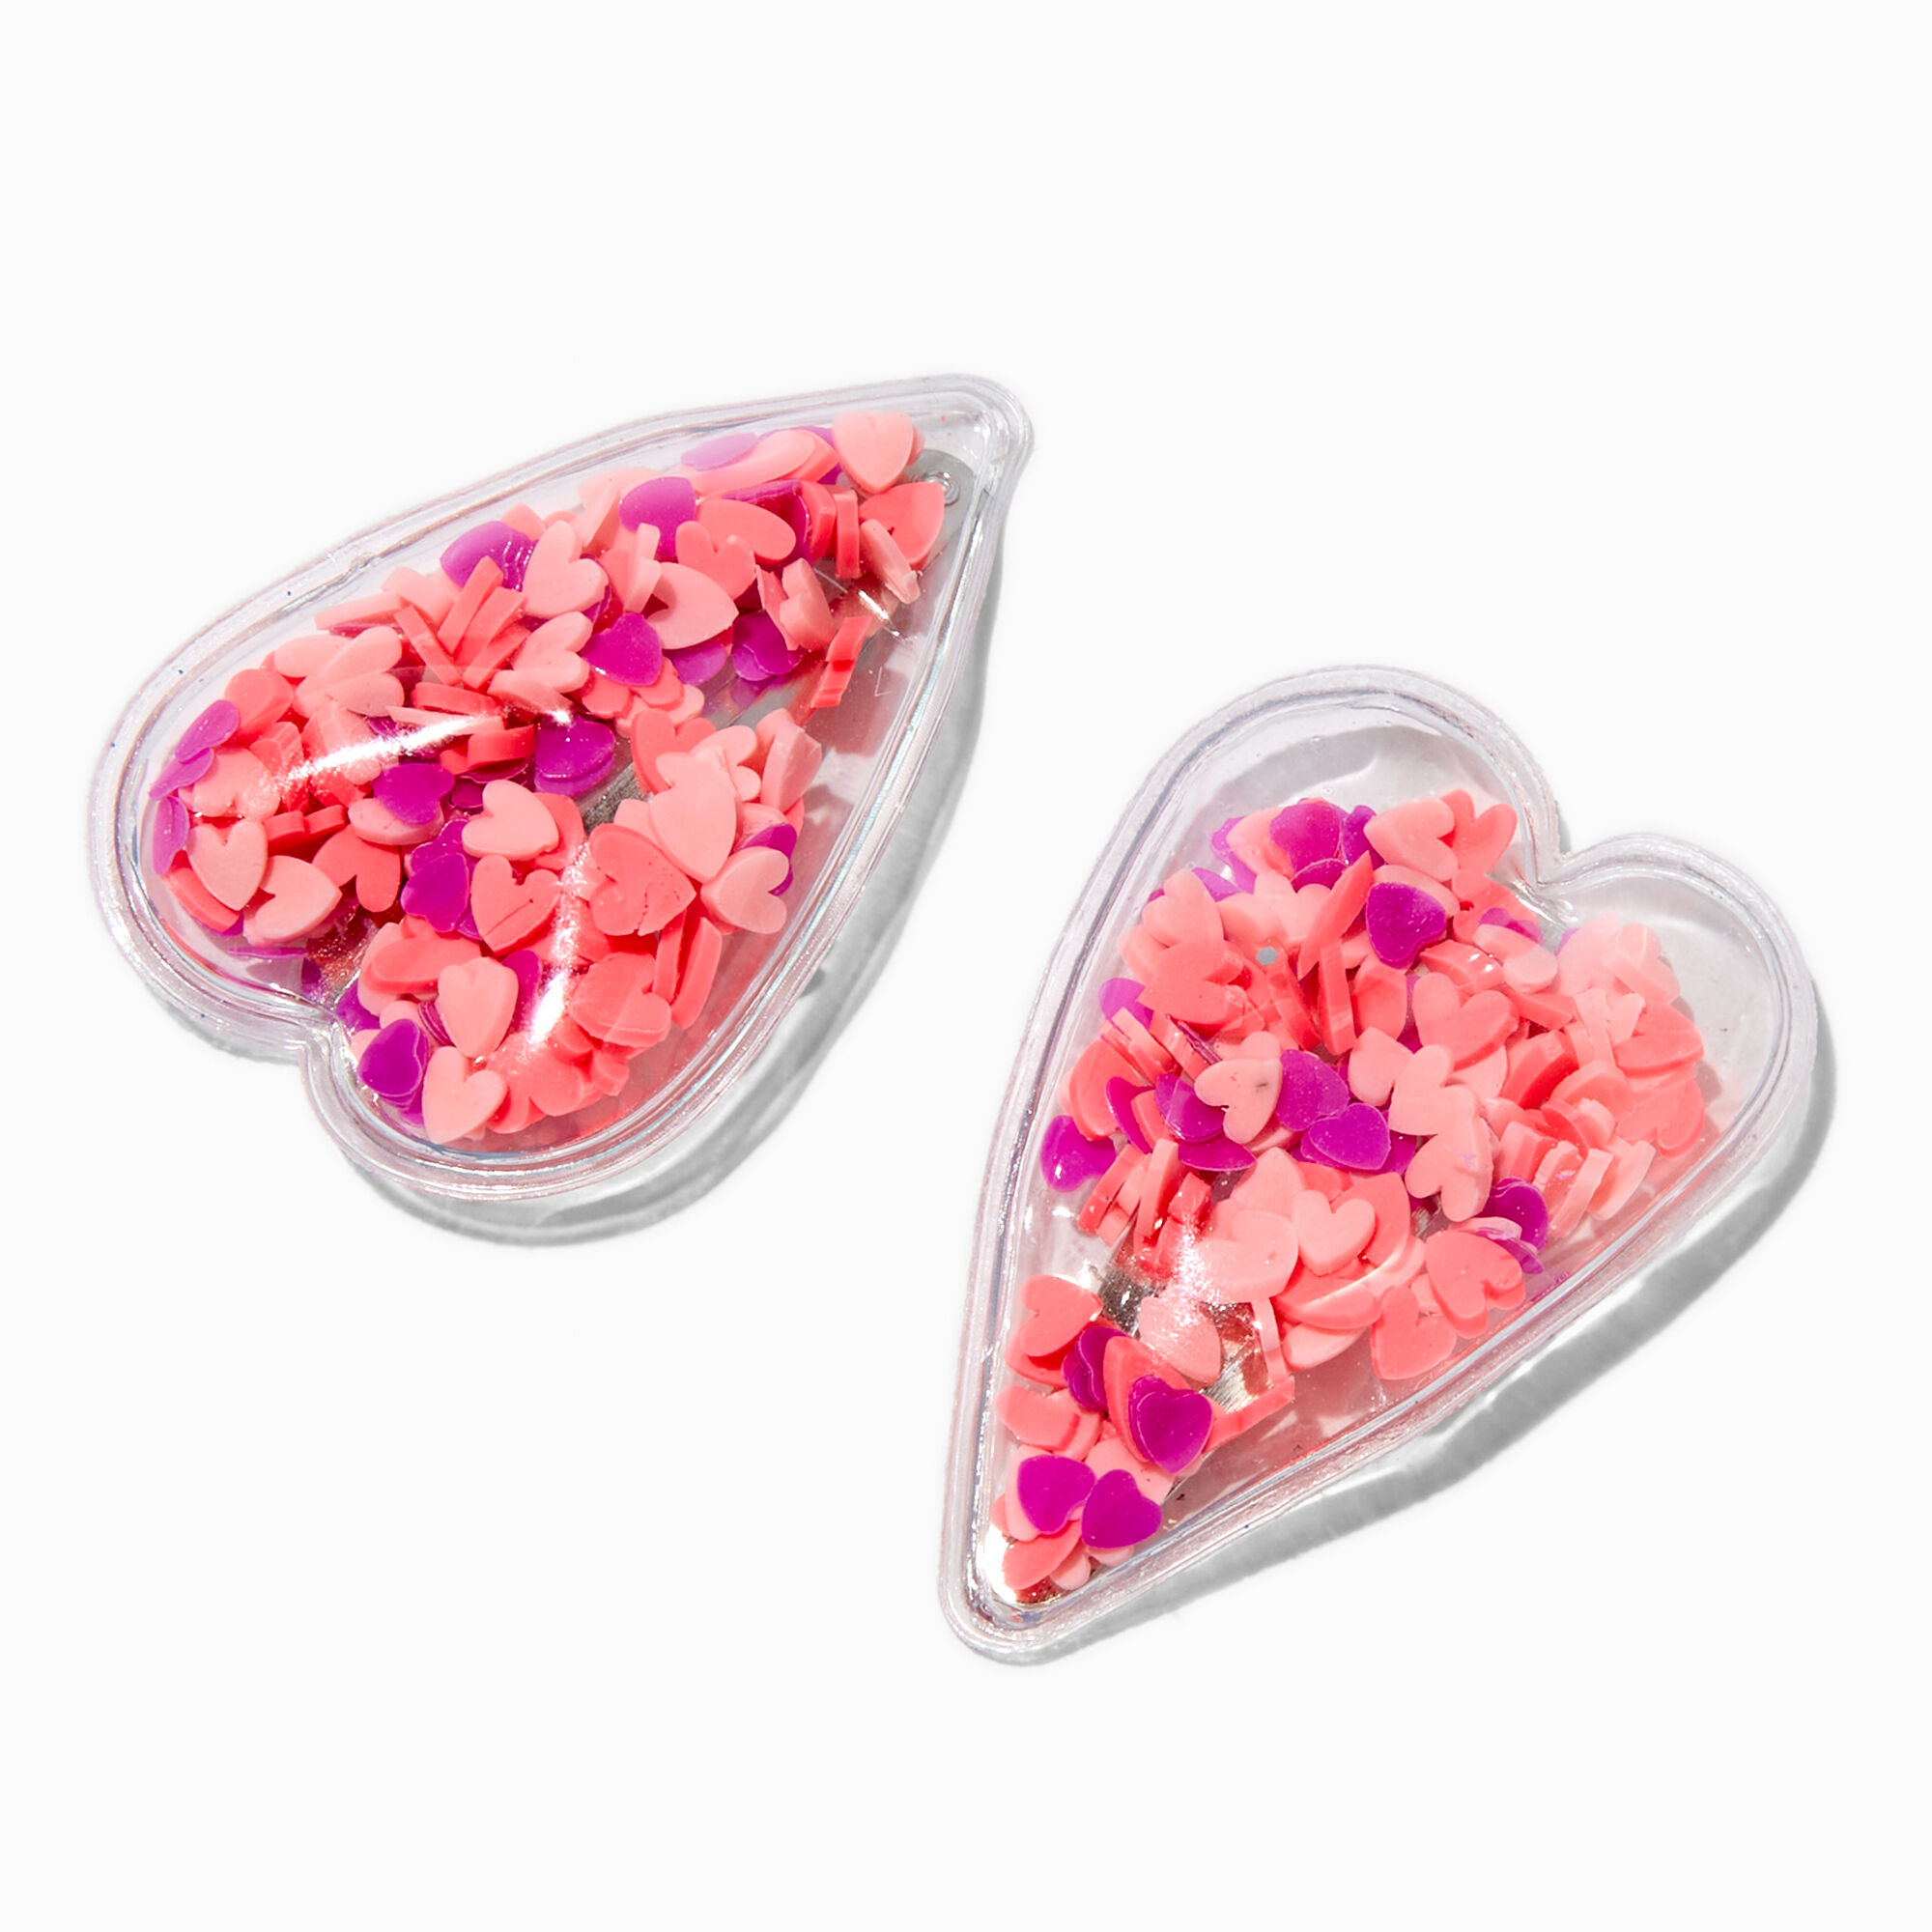 View Claires Club Shaker Heart Snap Hair Clips 2 Pack Pink information